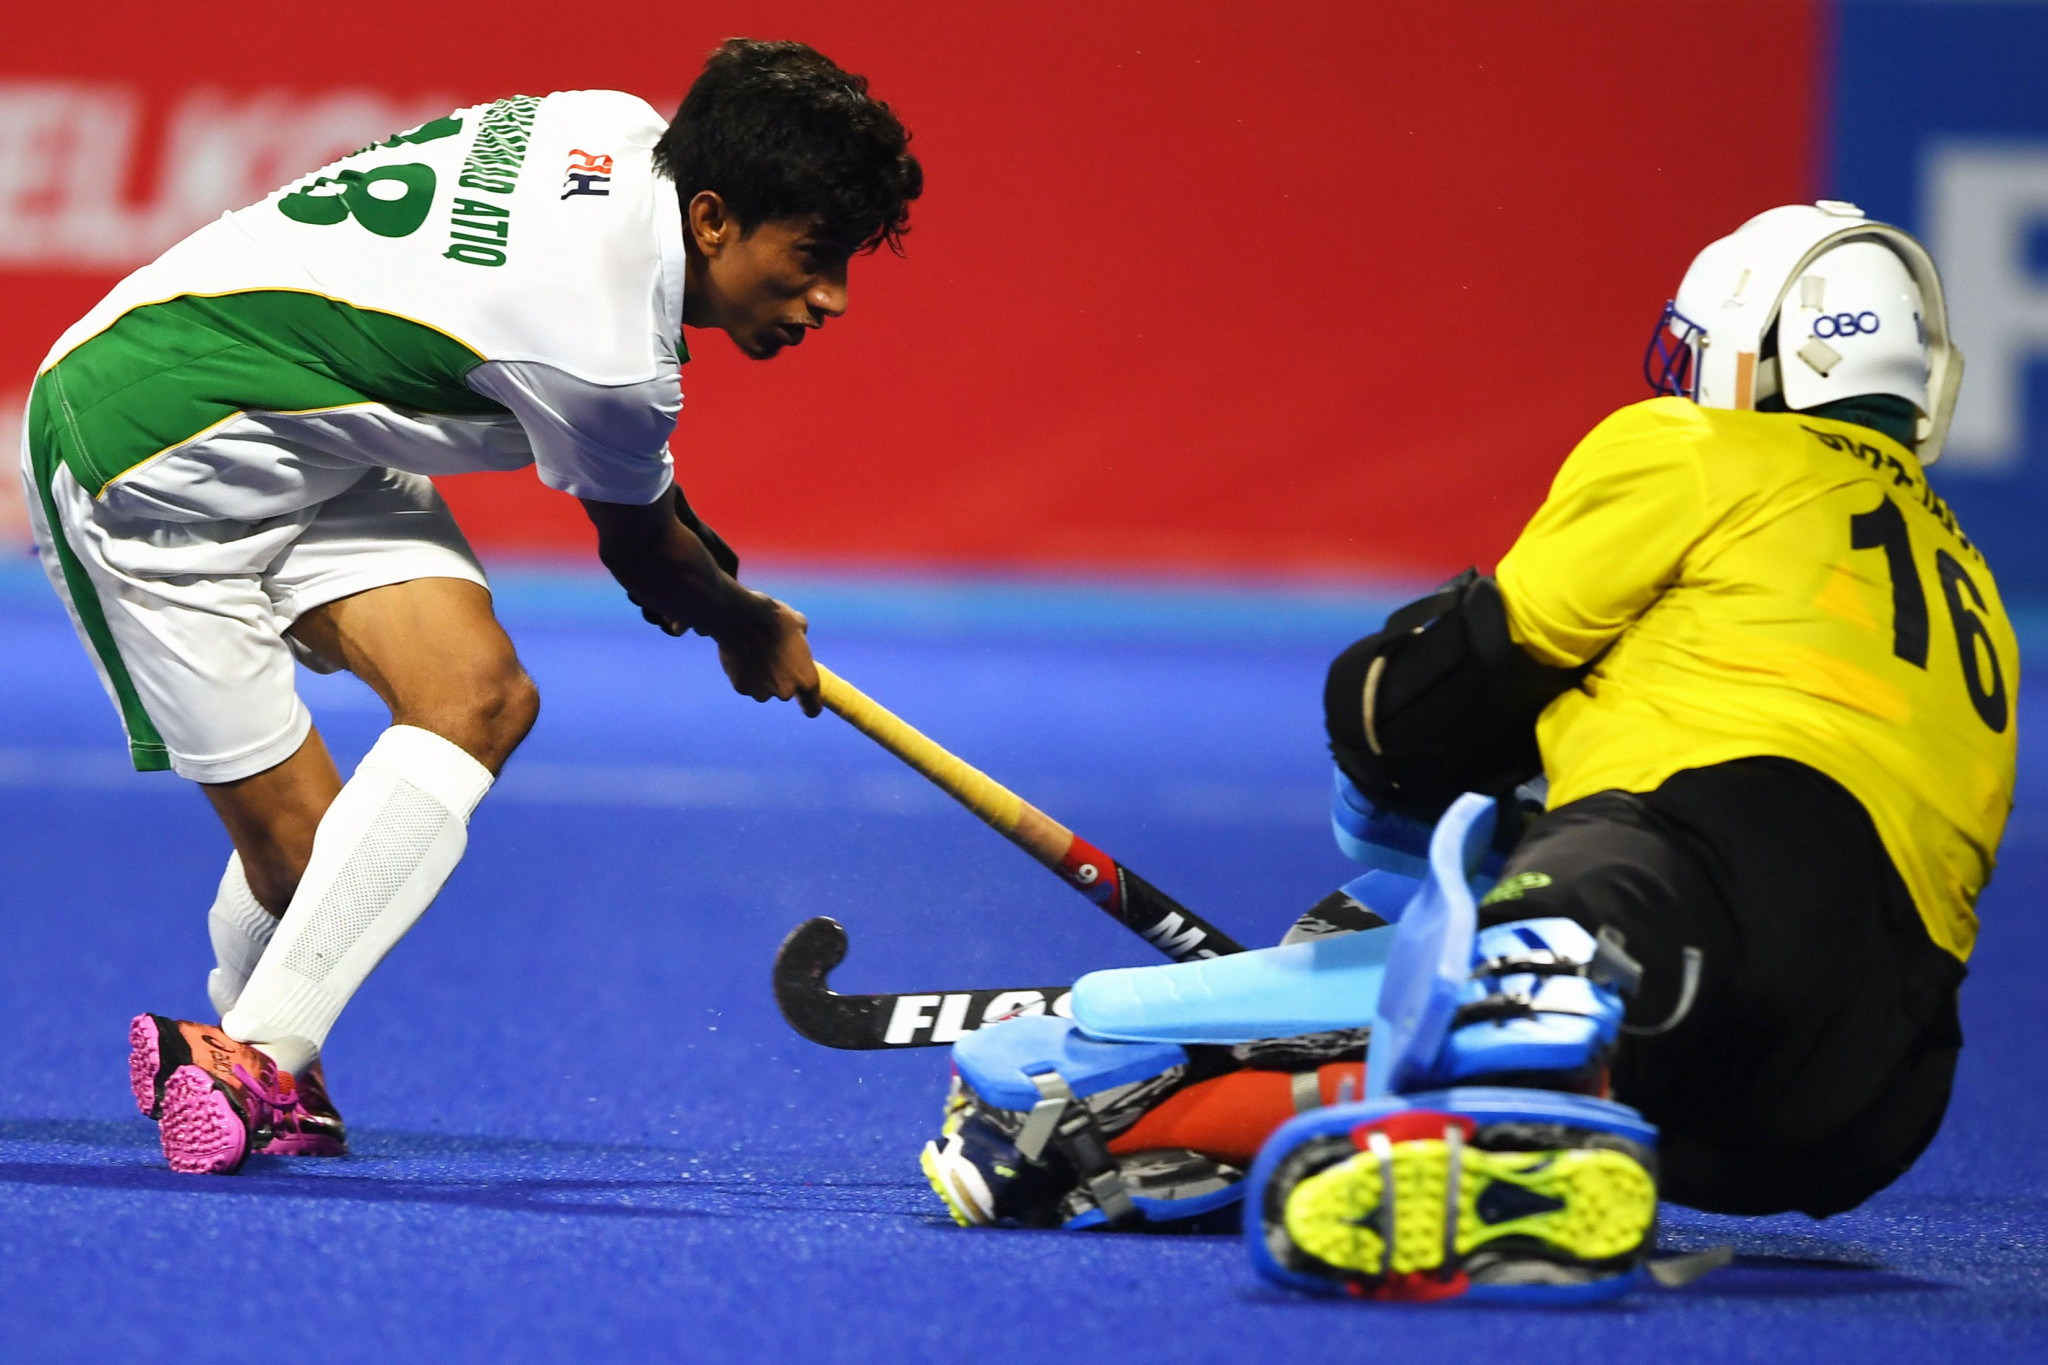 The event is due to be the first major hockey tournament held in Pakistan for over a decade ©Getty Images